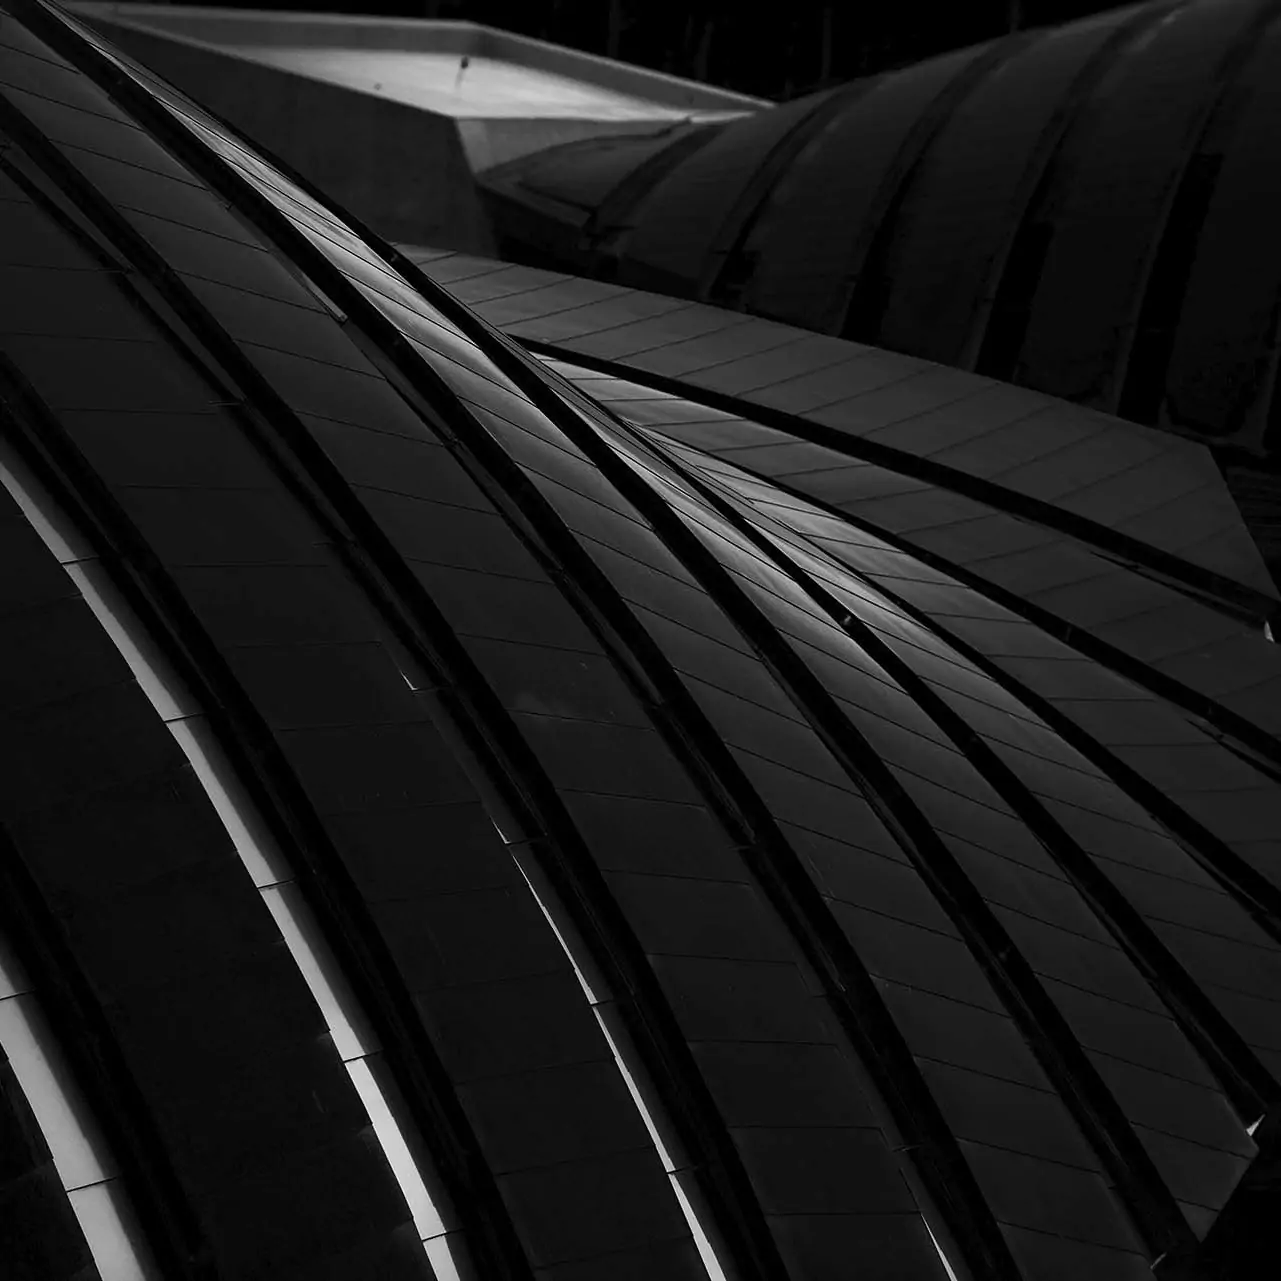 Roof Detail of Crystal Bridges Museum, Bentonville, Arkansas - Professional Architecture Photographer and Commercial Photography of Buildings